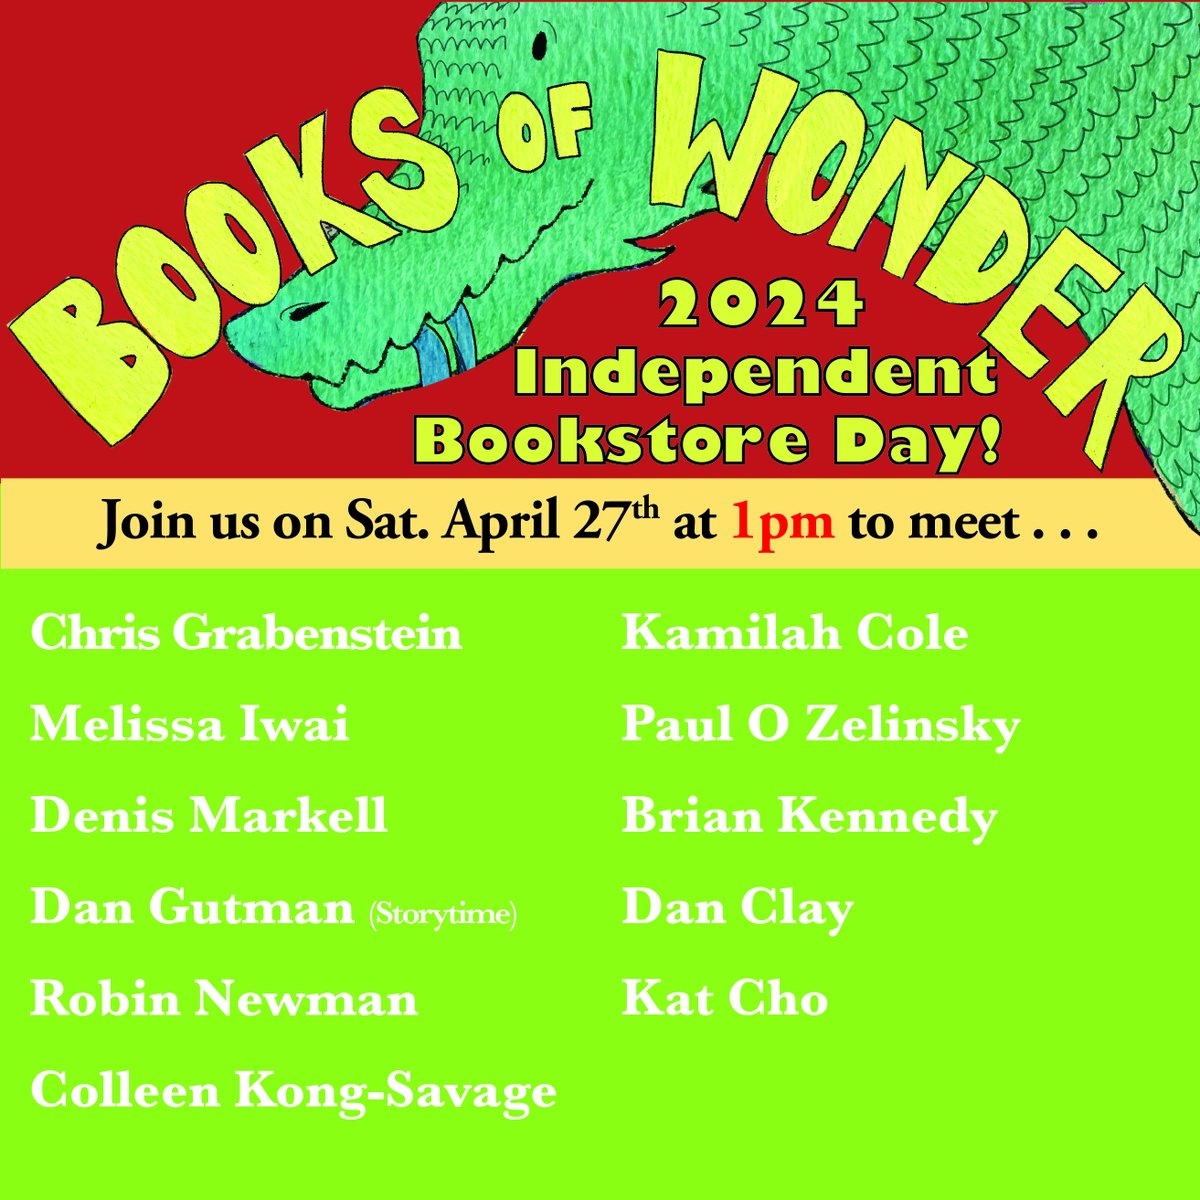 This Saturday is Independent Bookstore Day! I'll be celebrating with two of my favorite indies. First, Greenlight Bookstore in Brooklyn and then Books Of Wonder #independentbookstoreday #independentbookstore